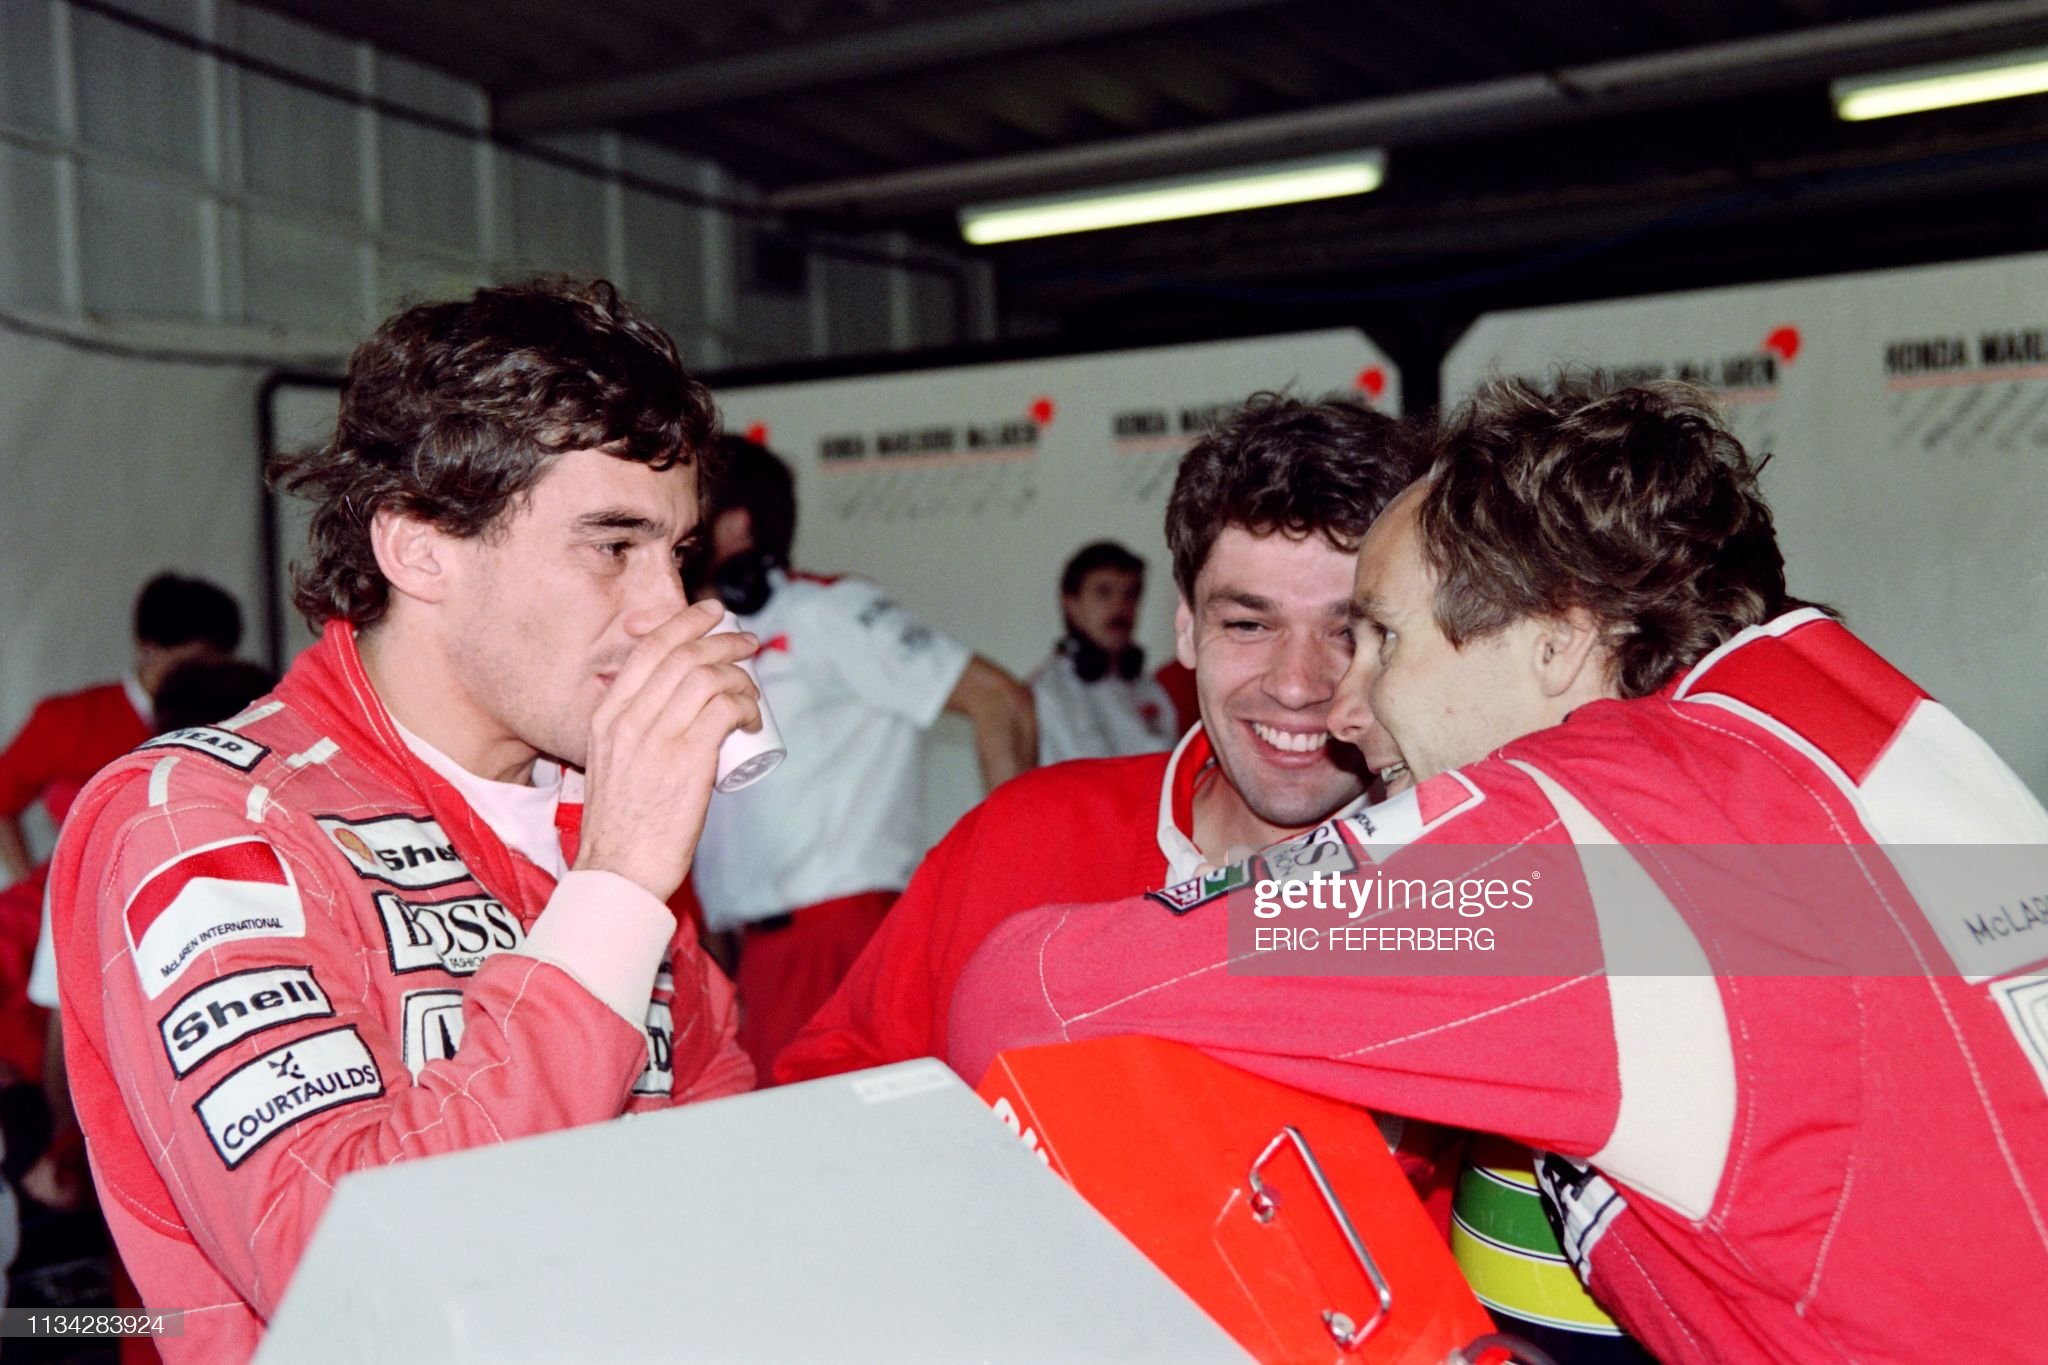 Ayrton Senna and Gerhard Berger at Silverstone on July 12, 1991. Photo by Getty Images.